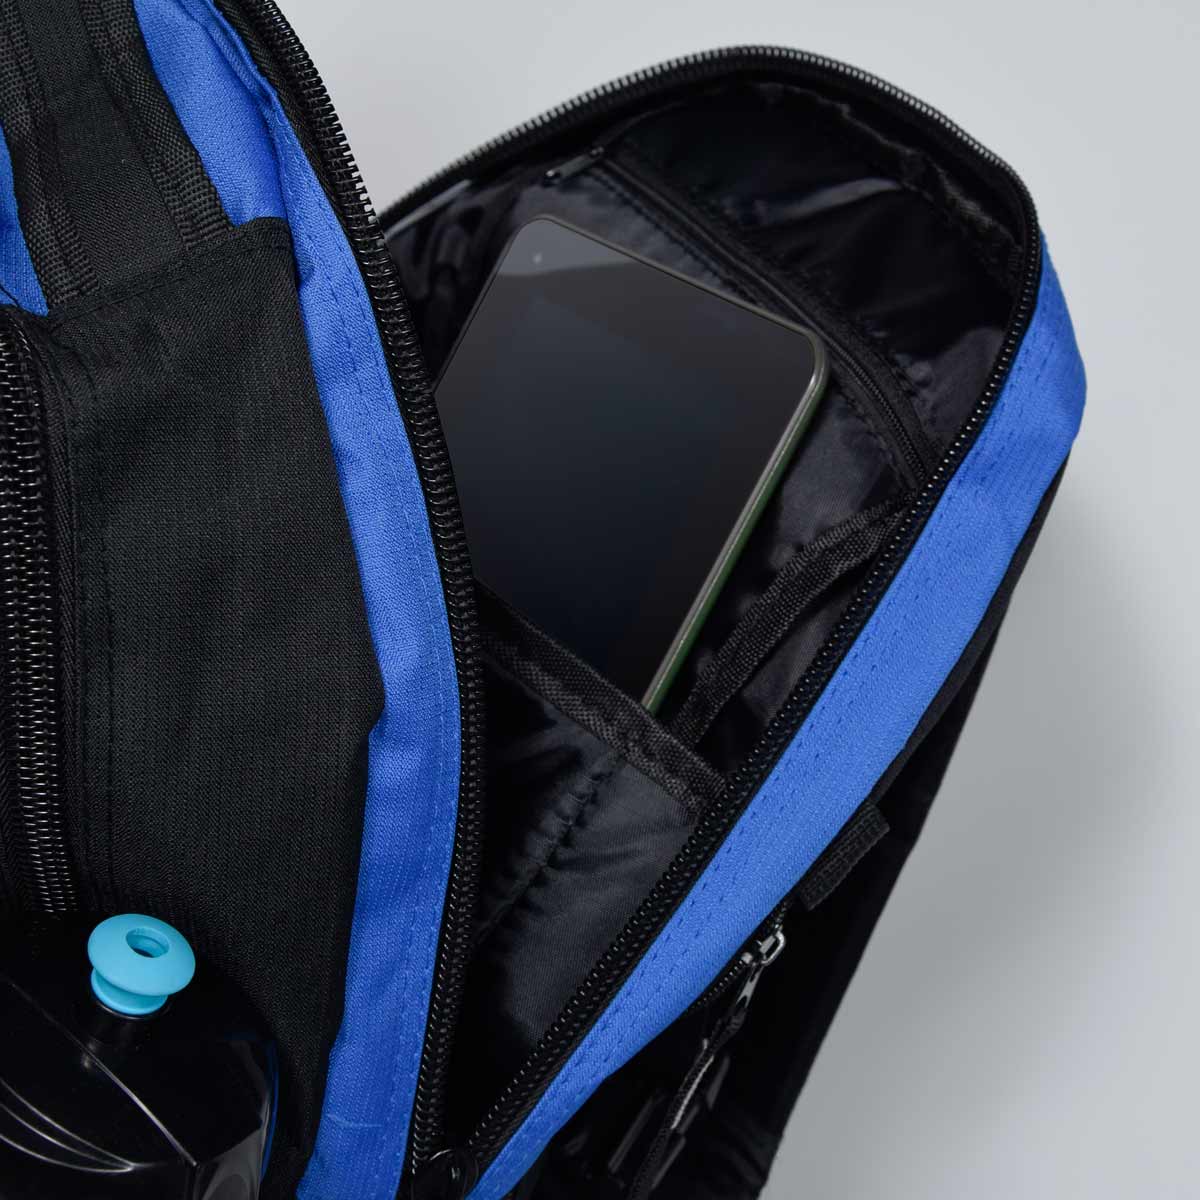 Casual promotion Backpack – 2007-75 (approx. 29 x 44 x 18 cm, blue/black)